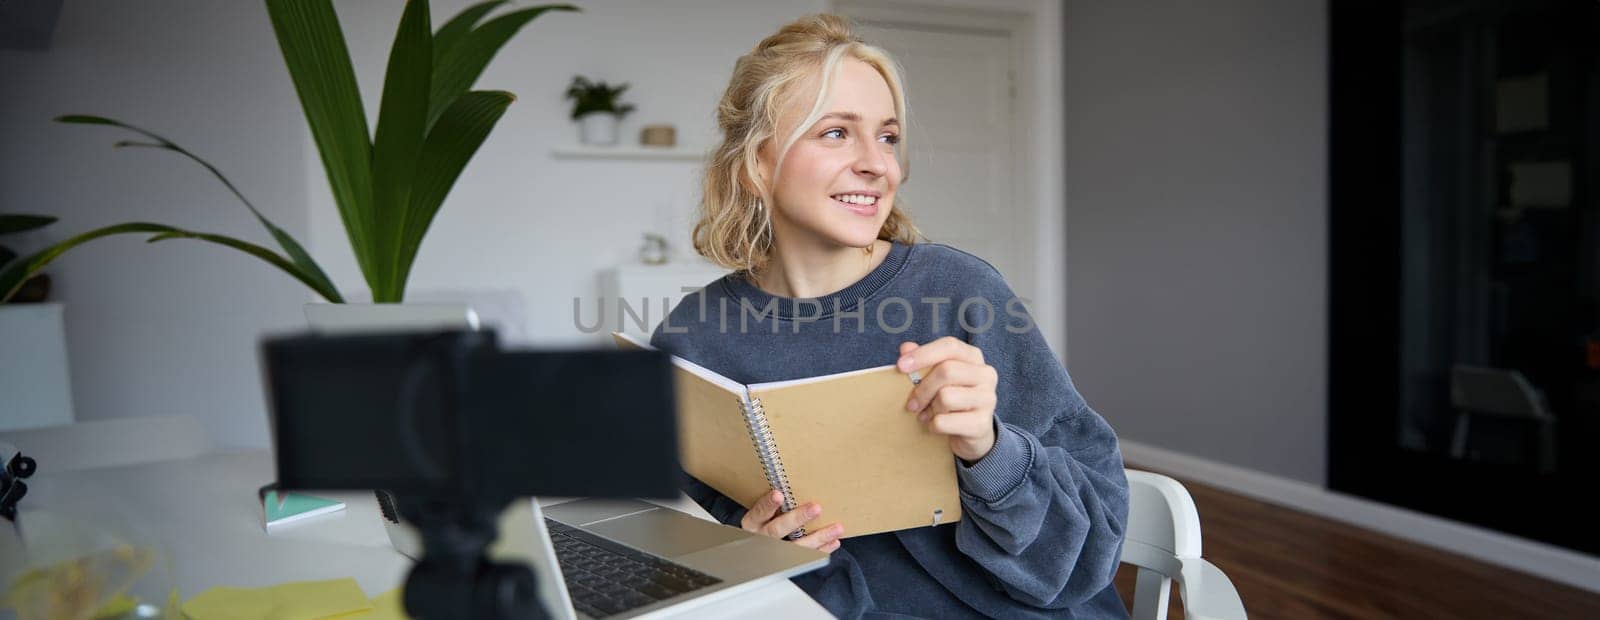 Portrait of smiling blond woman, sitting in bedroom, using laptop and digital camera, recording video for lifestyle blog, reading, using her notebook by Benzoix